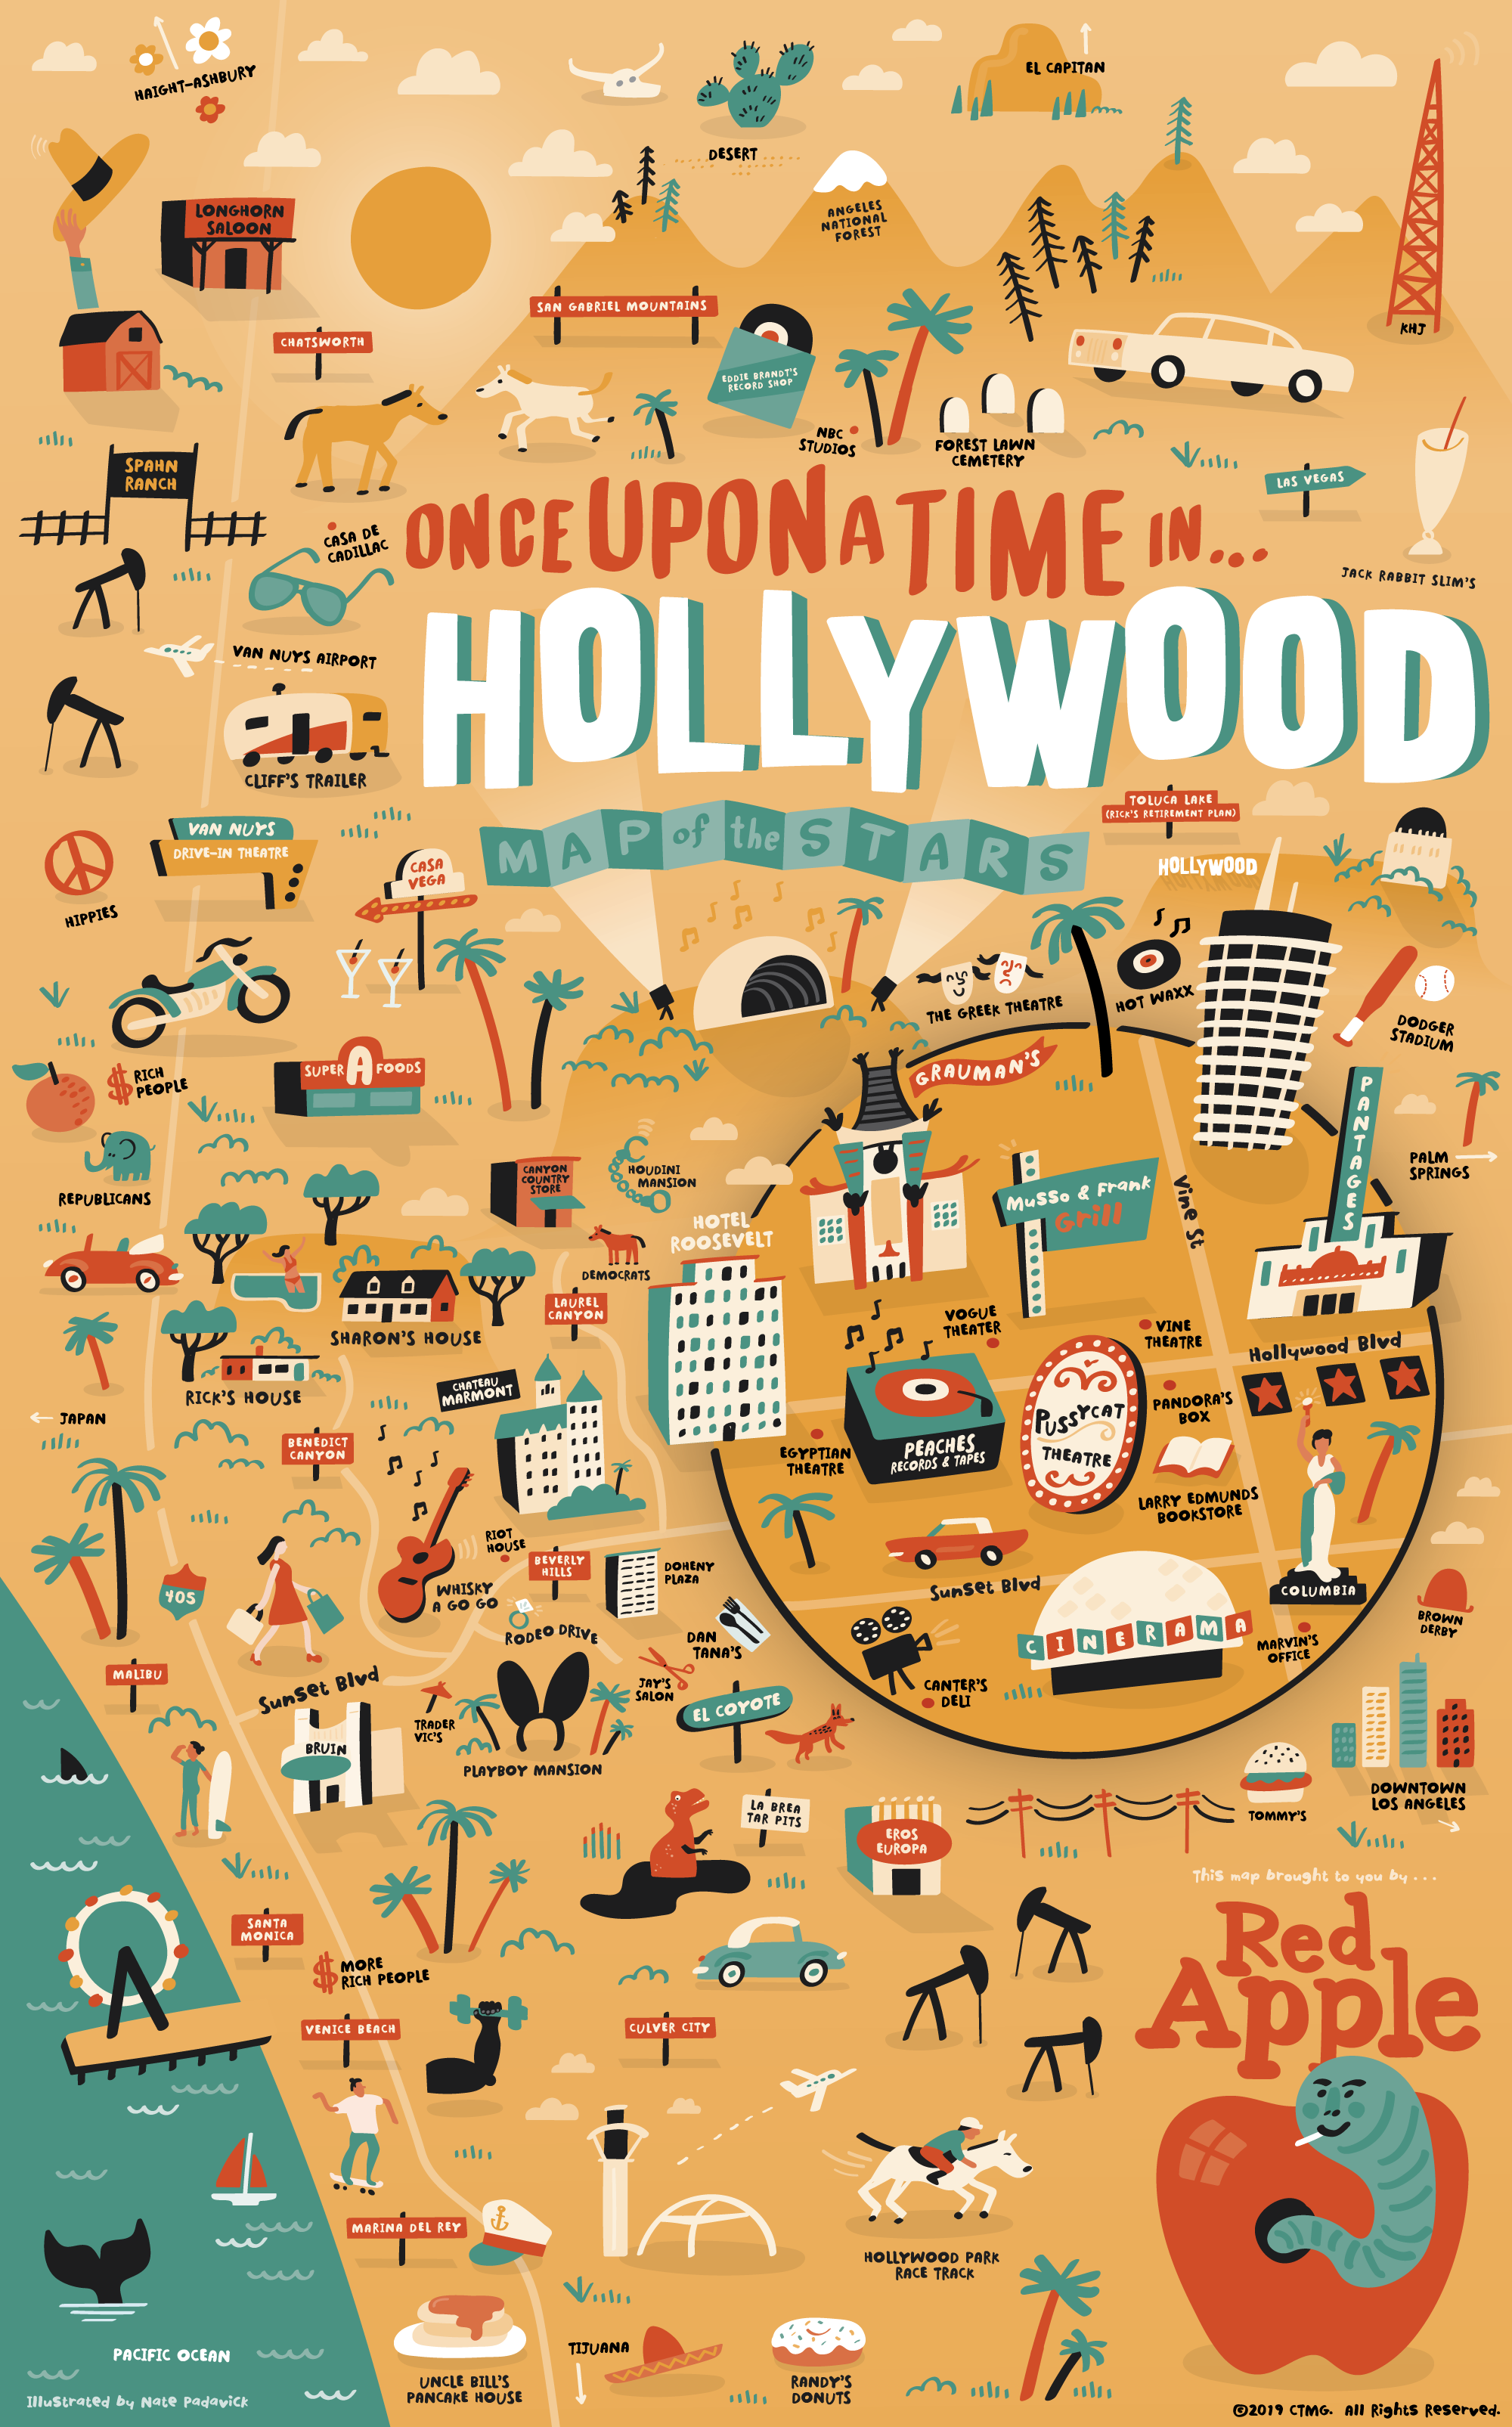 ONCE-UPON-A-TIME-IN-HOLLYWOOD-ILLUSTRATED-MAP-BY-NATE-PADAVICK-promo.png